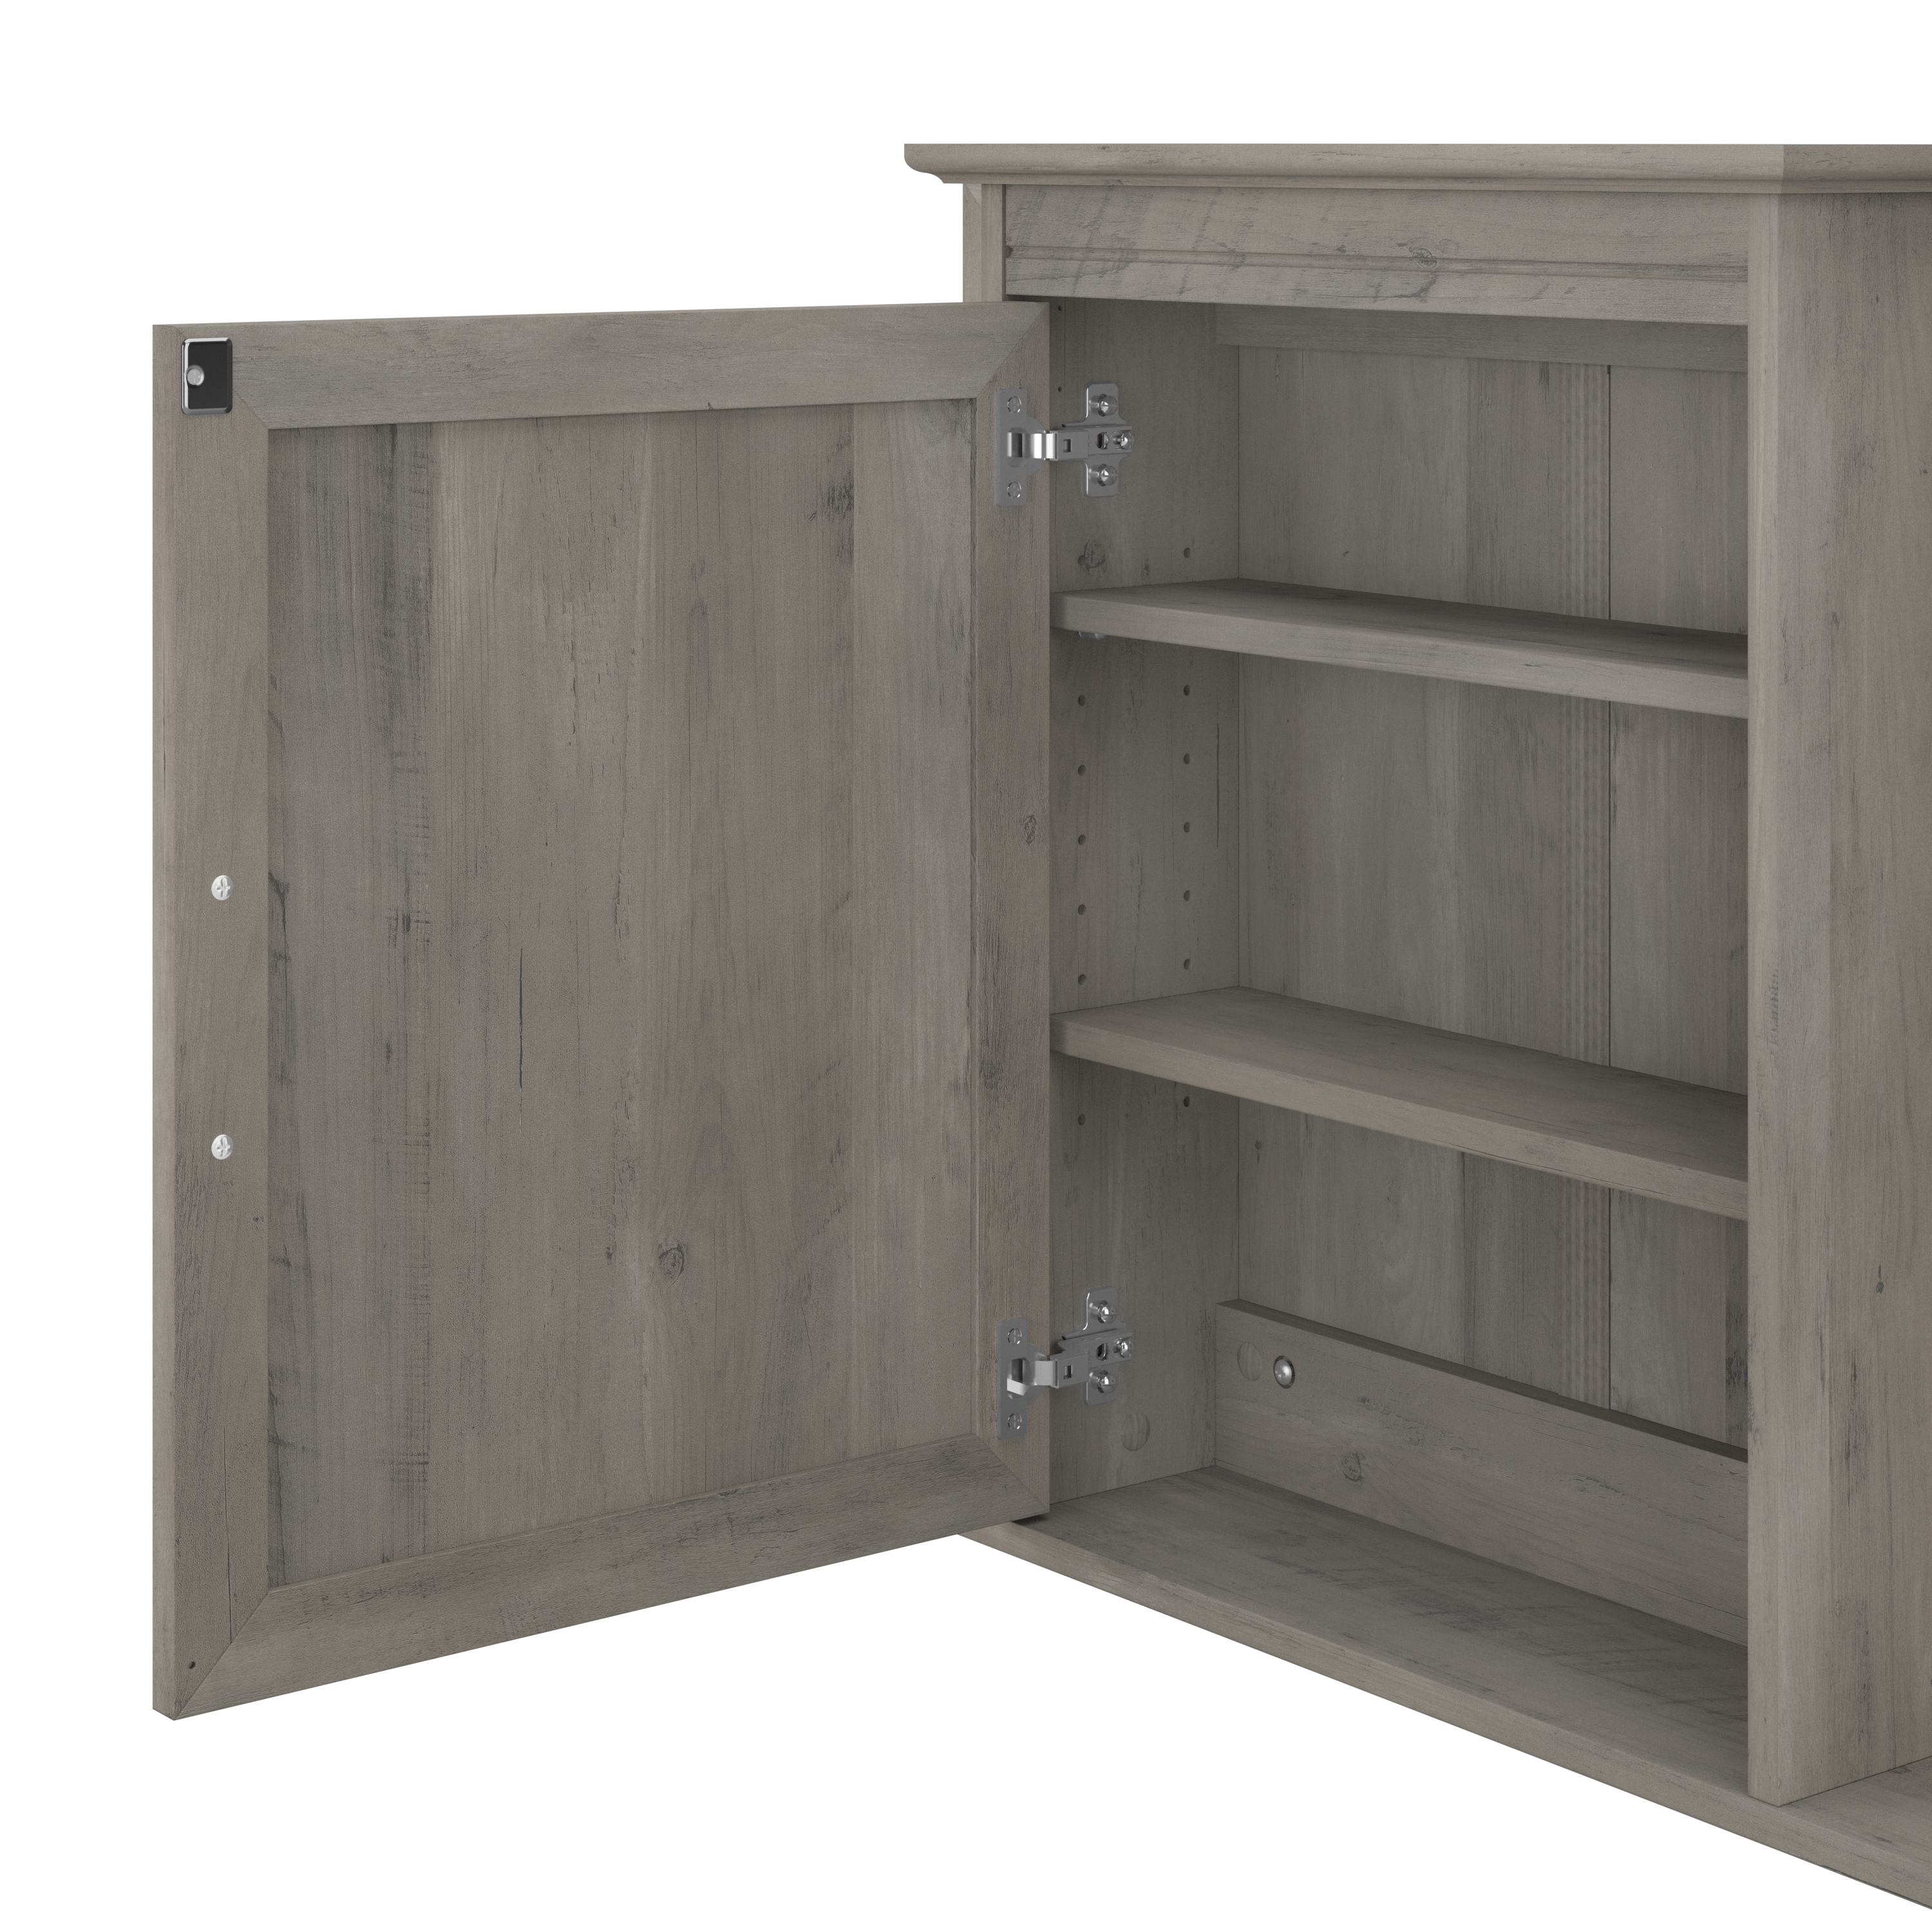 Shop Bush Furniture Key West Tall Linen Cabinet and Over The Toilet Storage Cabinet 03 KWS038DG #color_driftwood gray